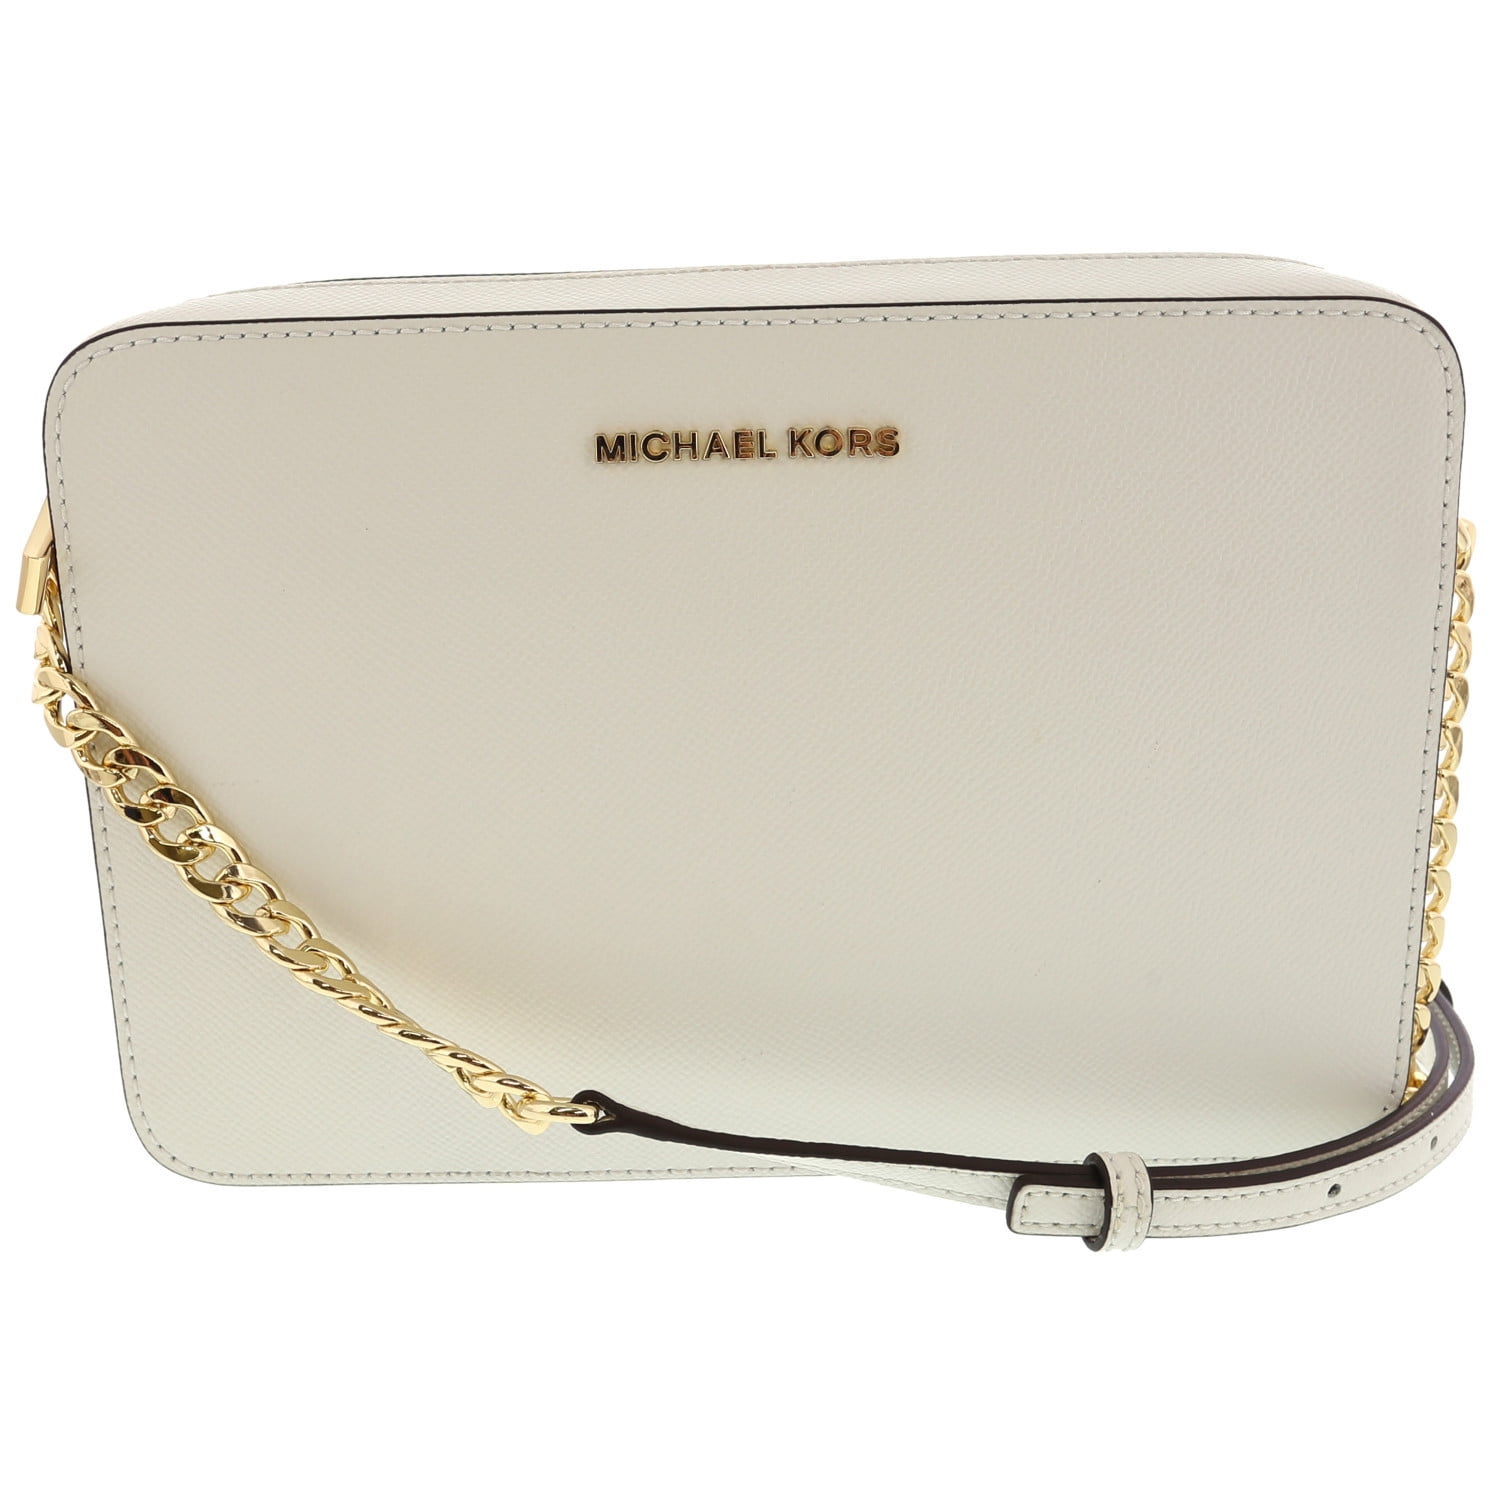 how to clean a white michael kors purse